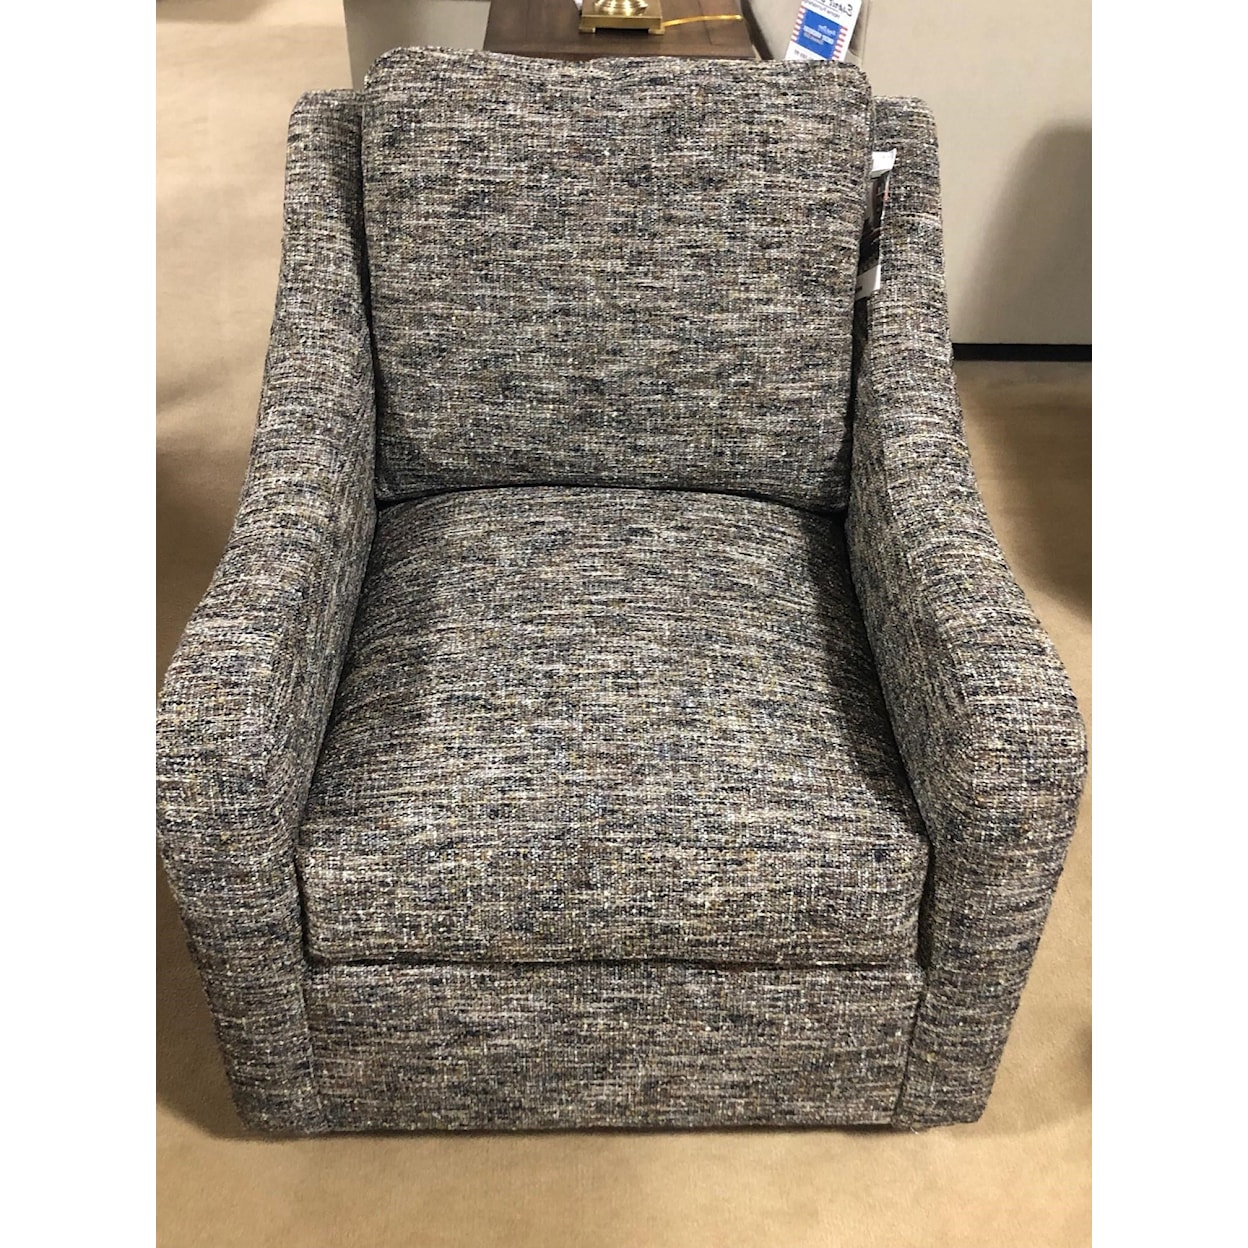 Craftmaster L087710BDSC Upholstered Swivel Chair